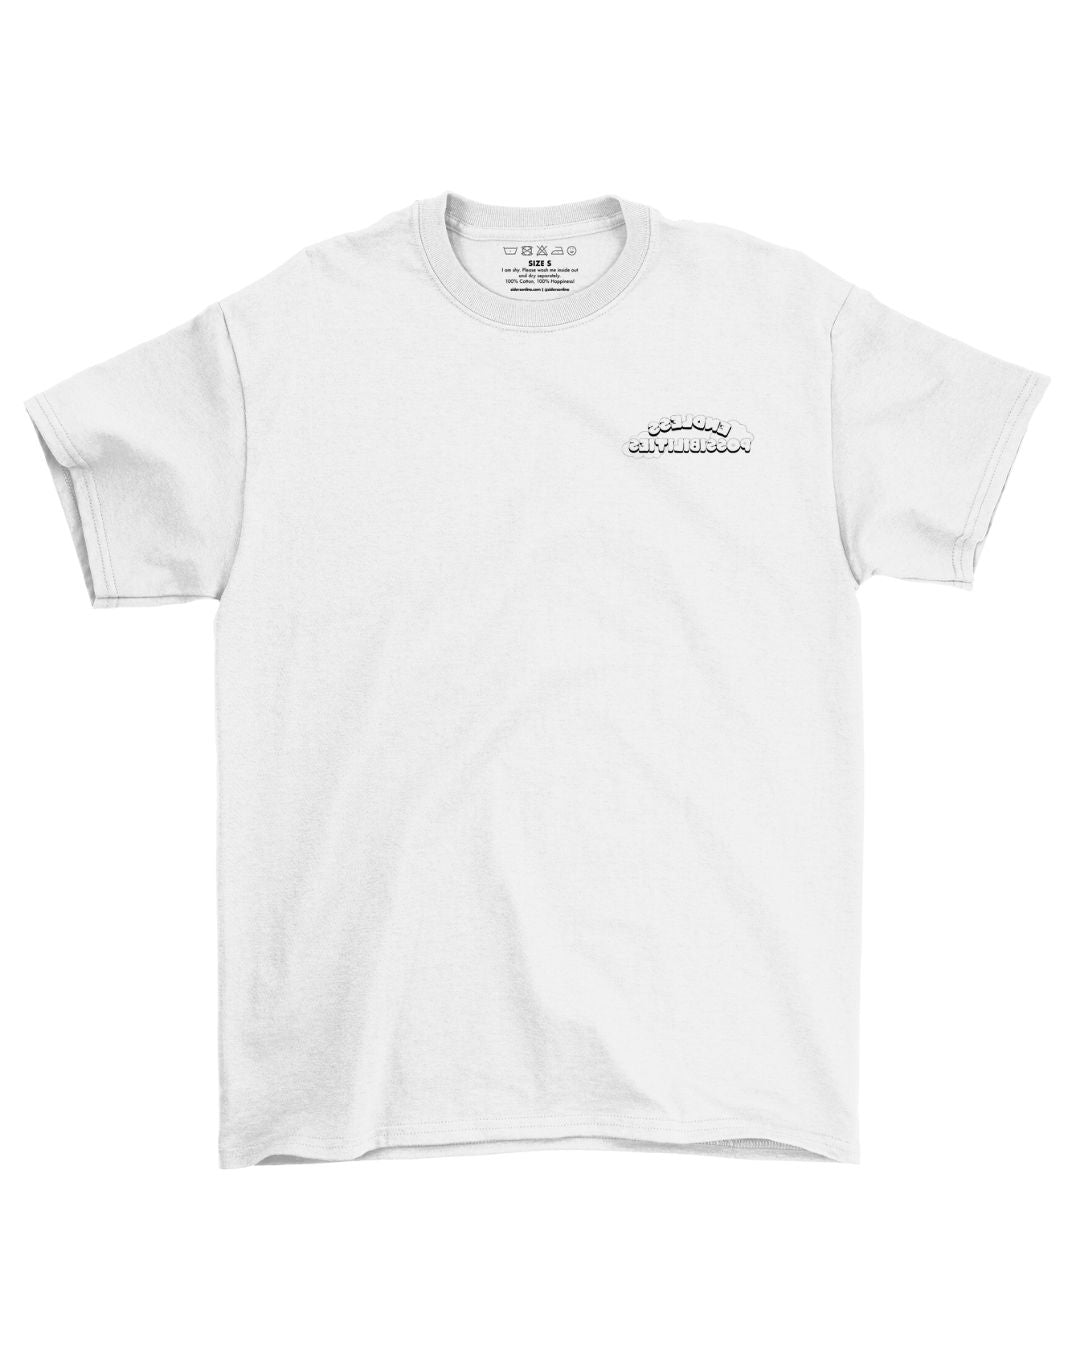 Endless Possibilities Oversized Tee In White